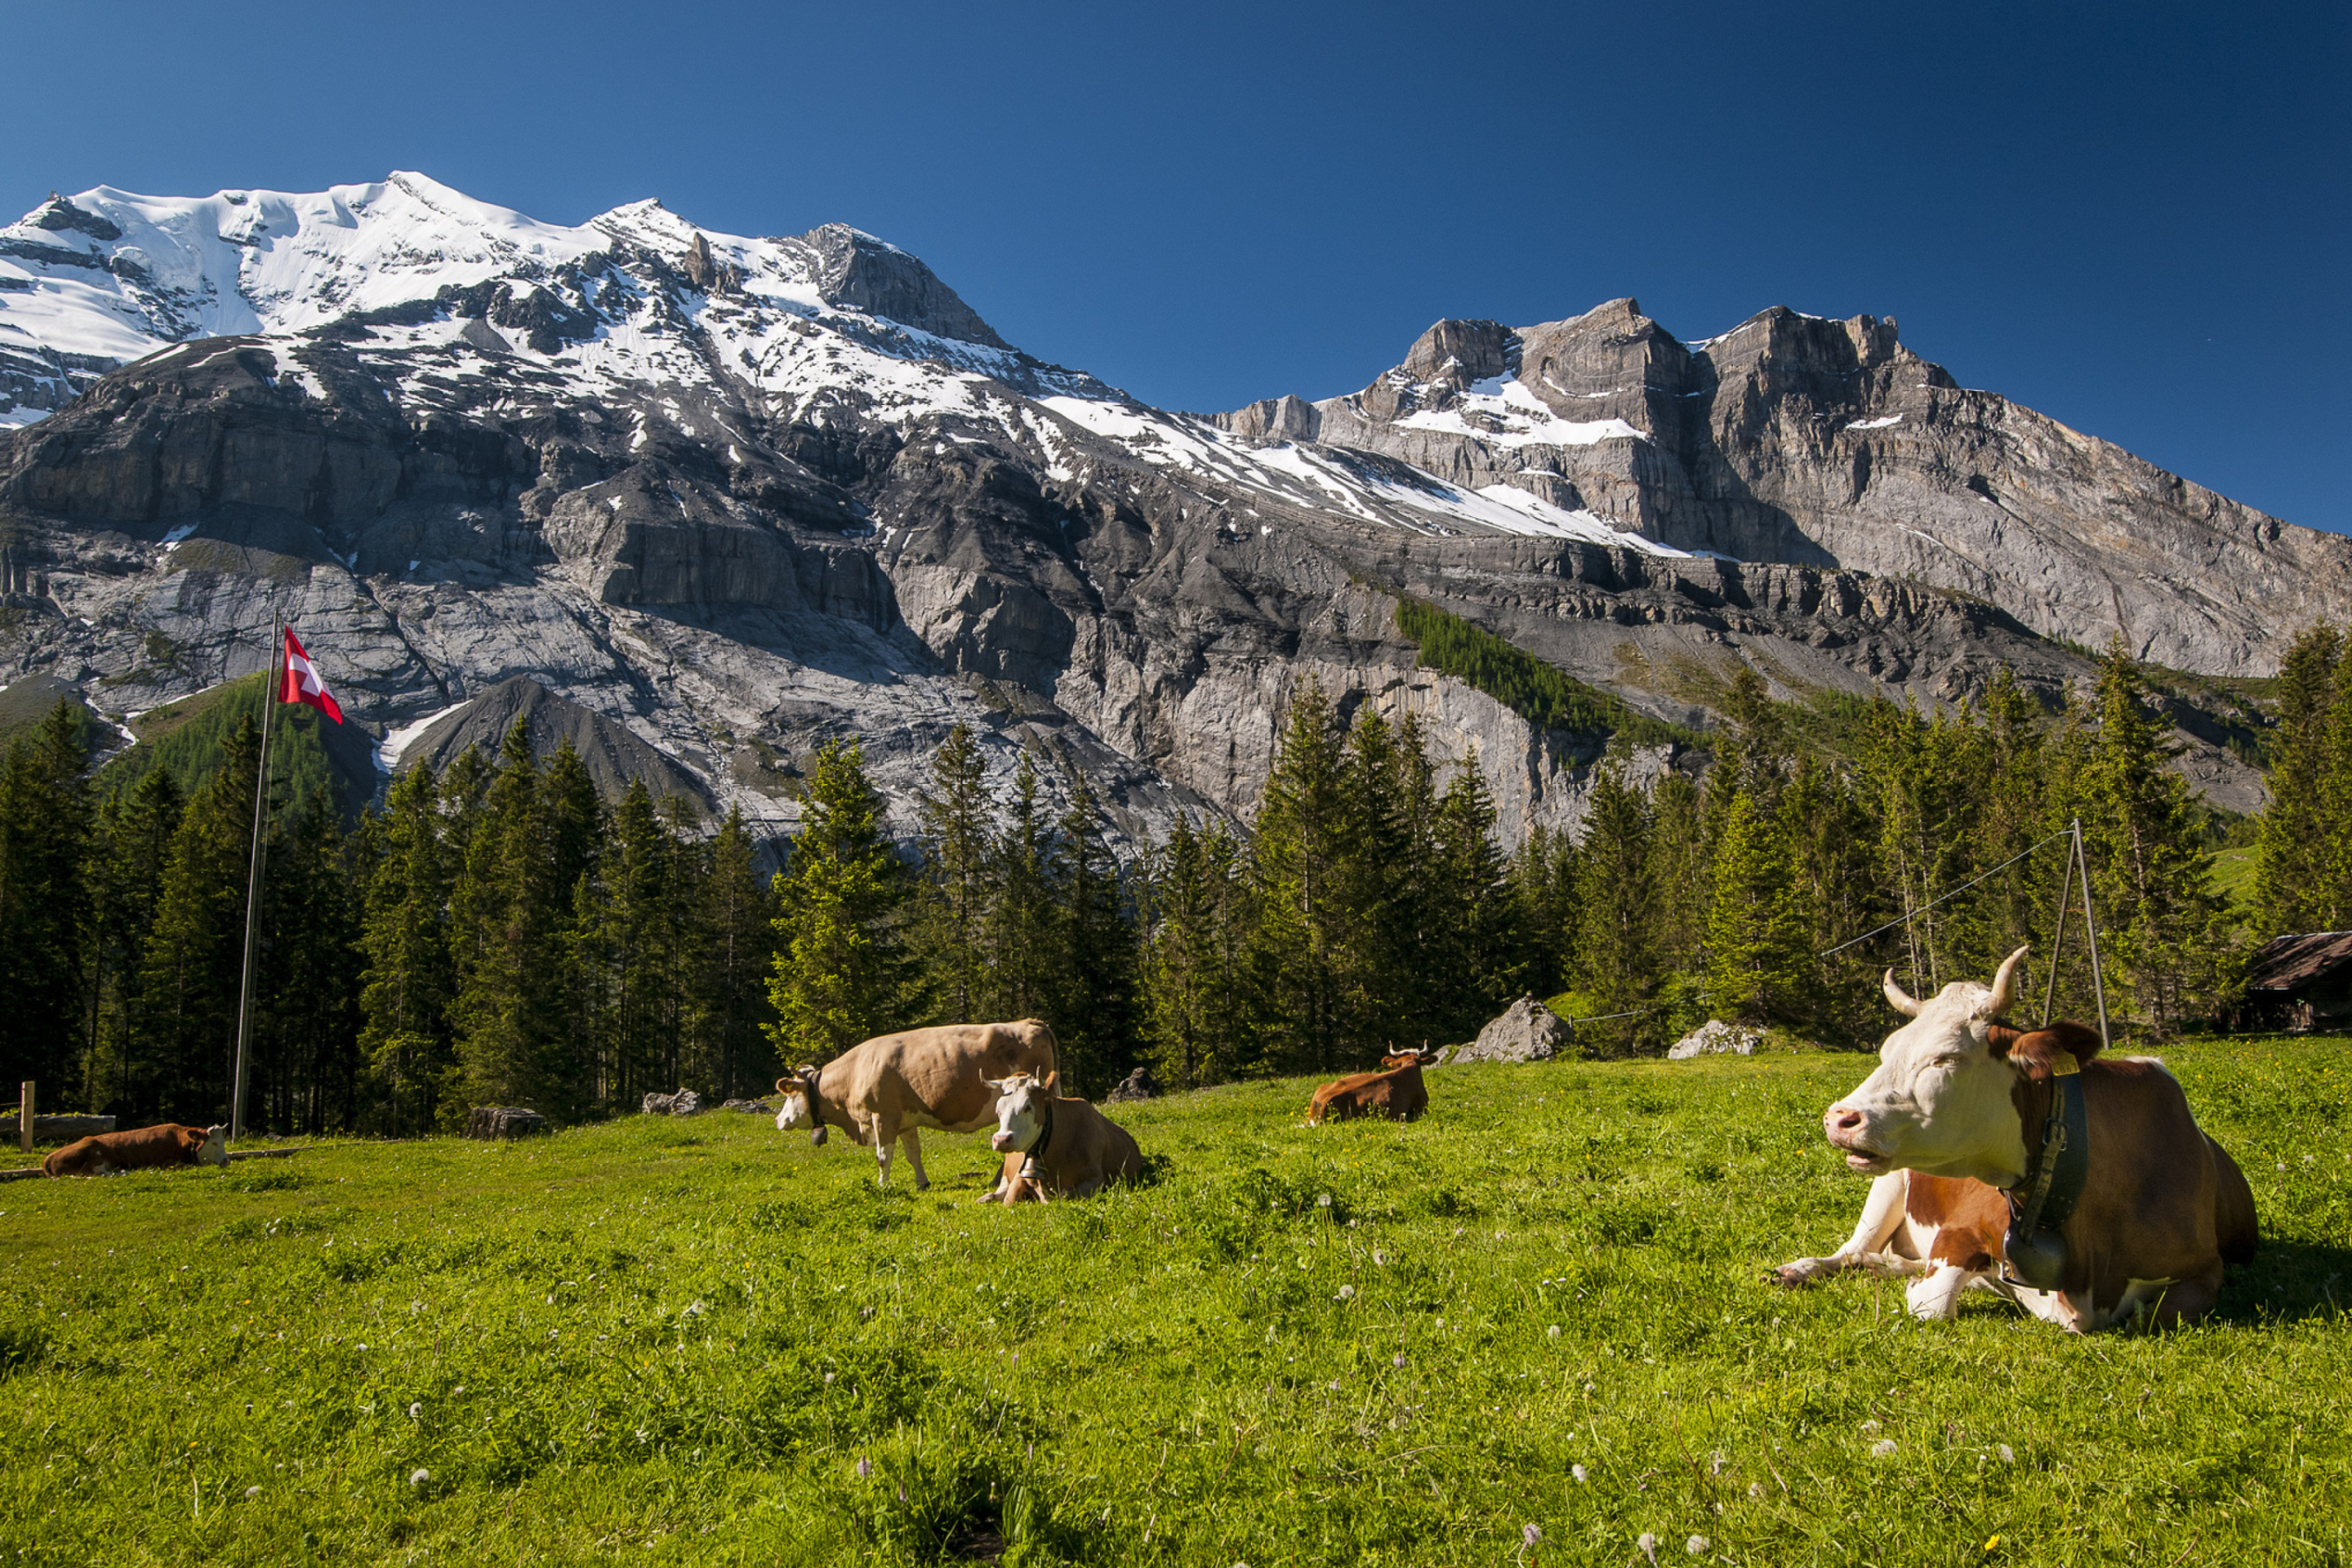 Switzerland Mountains And Cows wallpaper 2880x1920